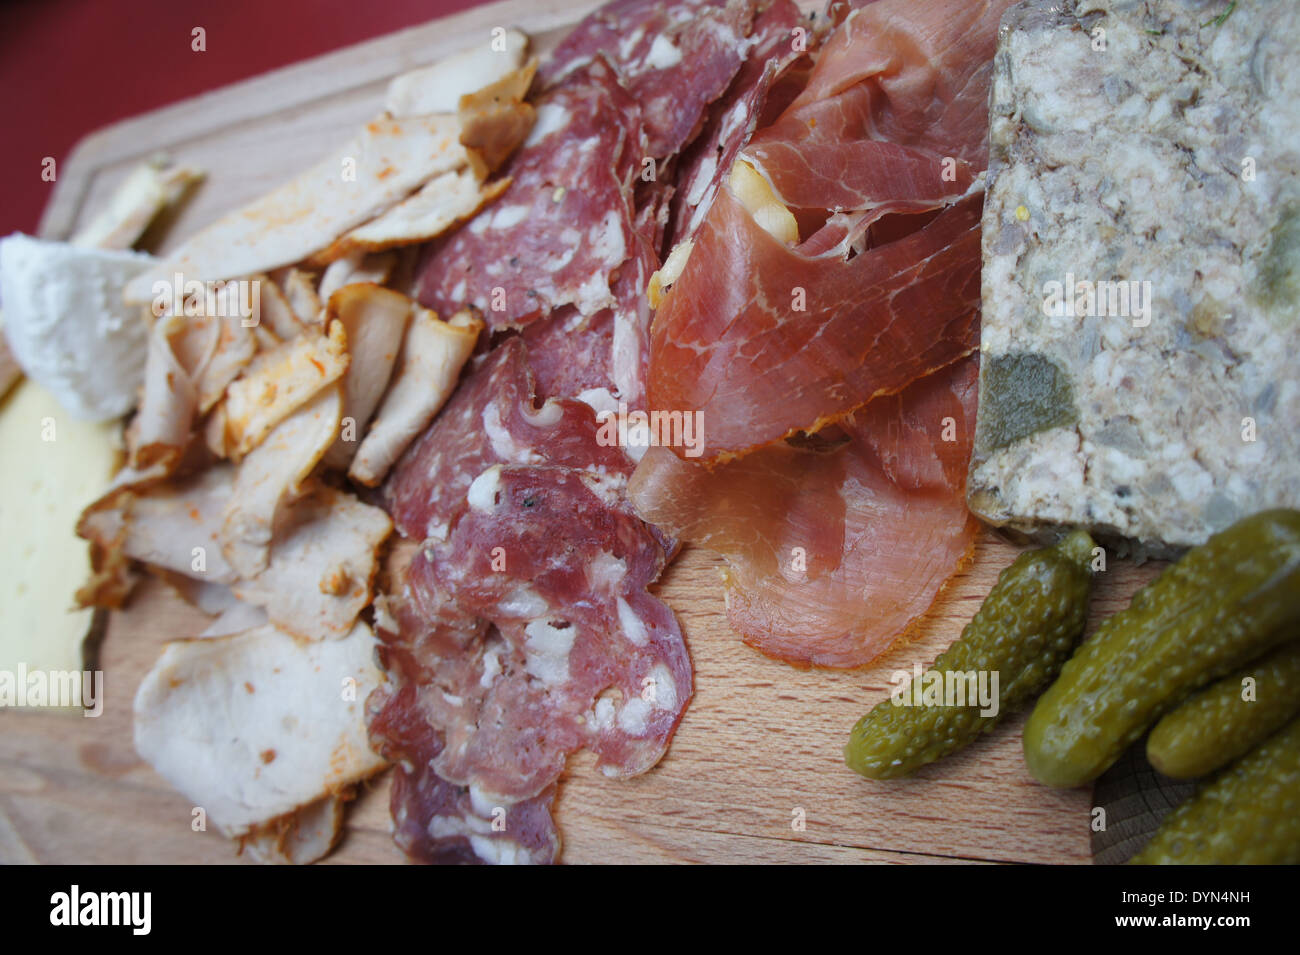 Charcuterie plate with salami, cheese, meat, pate, pickles on wooden cutting board Stock Photo